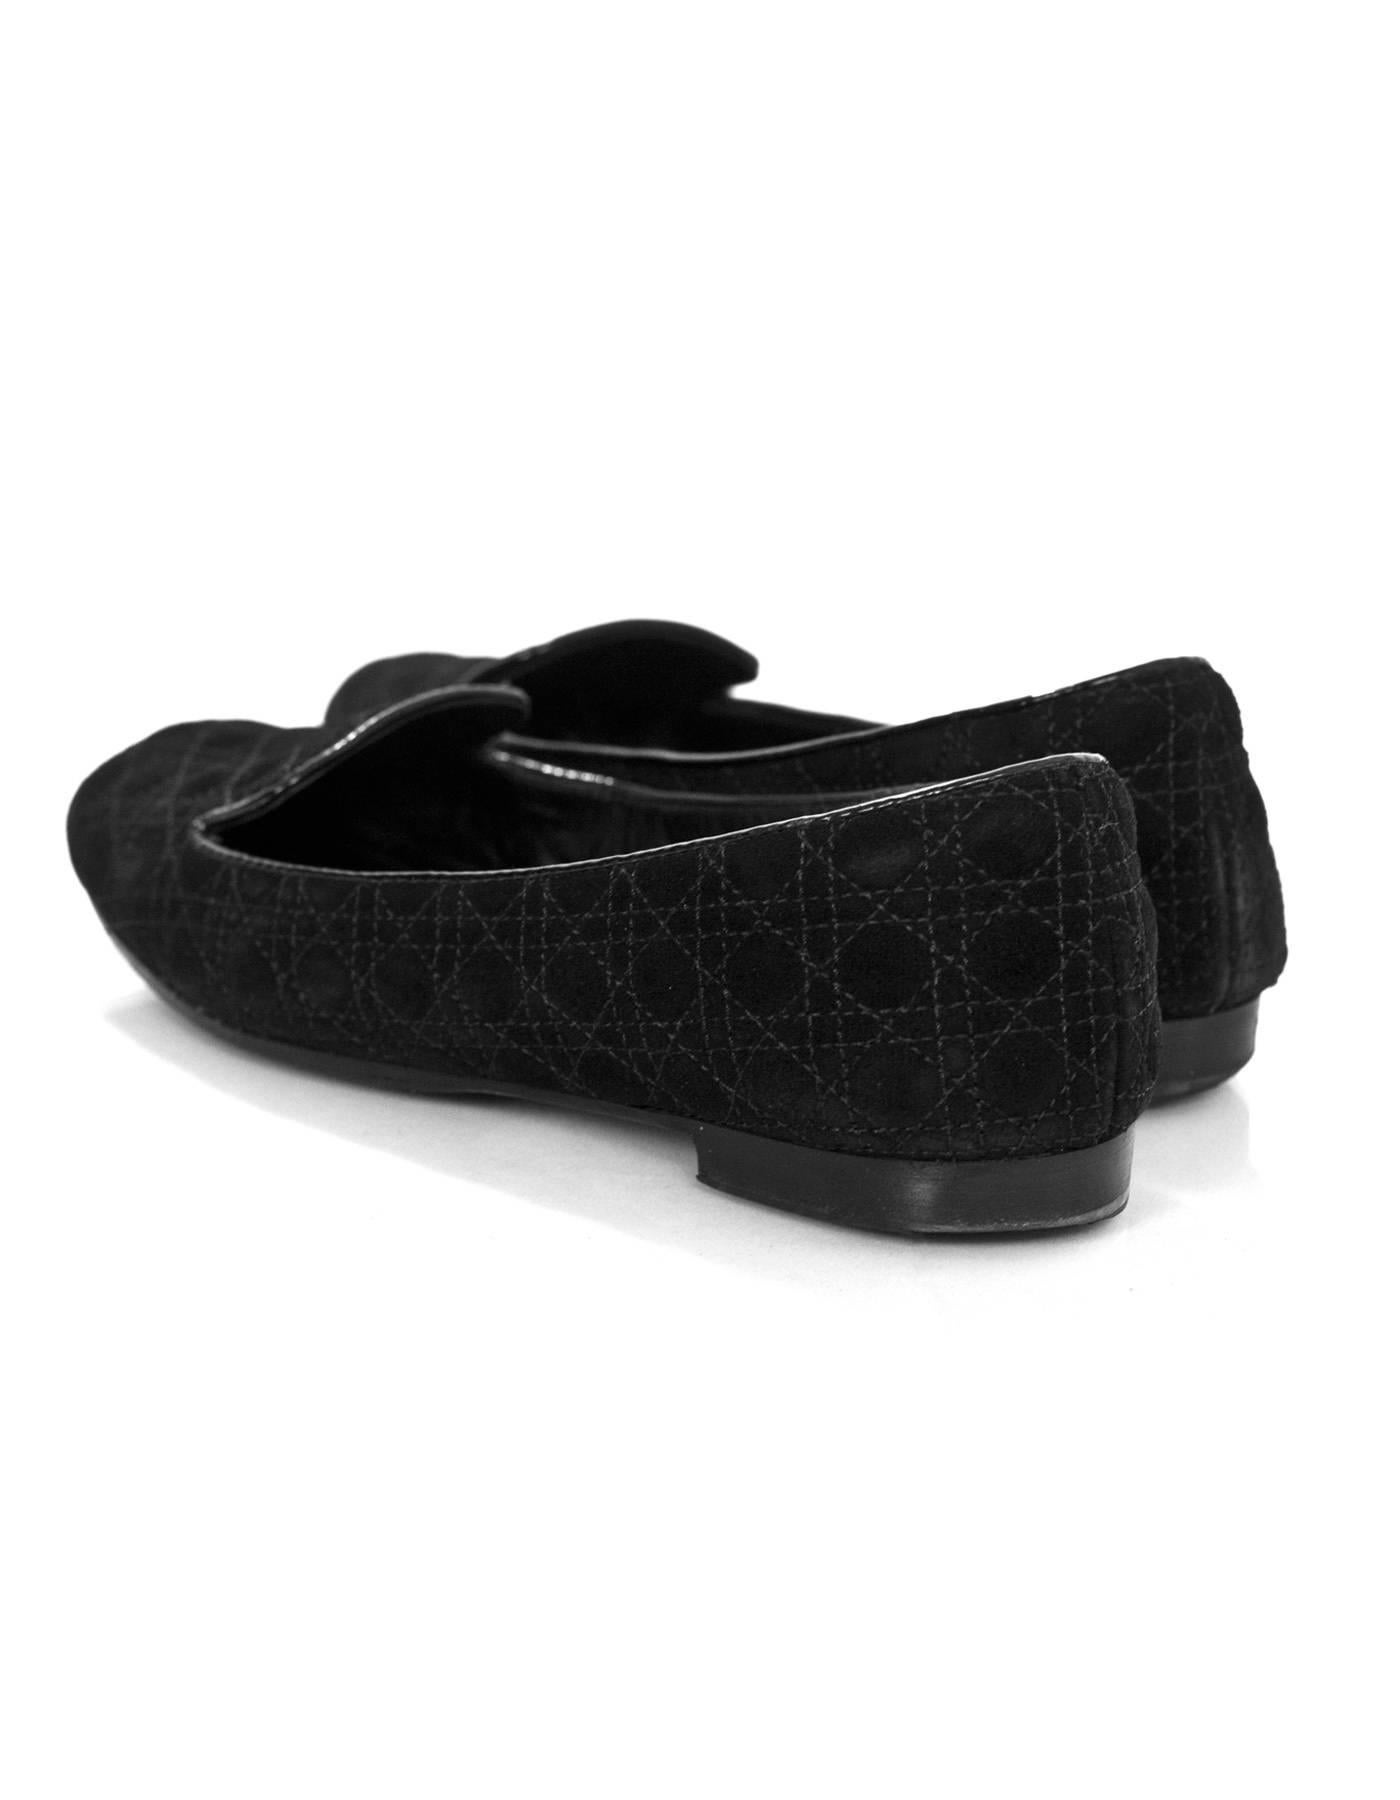 Women's Christian Dior Black Suede Quilted Loafers Sz 35 rt. $610